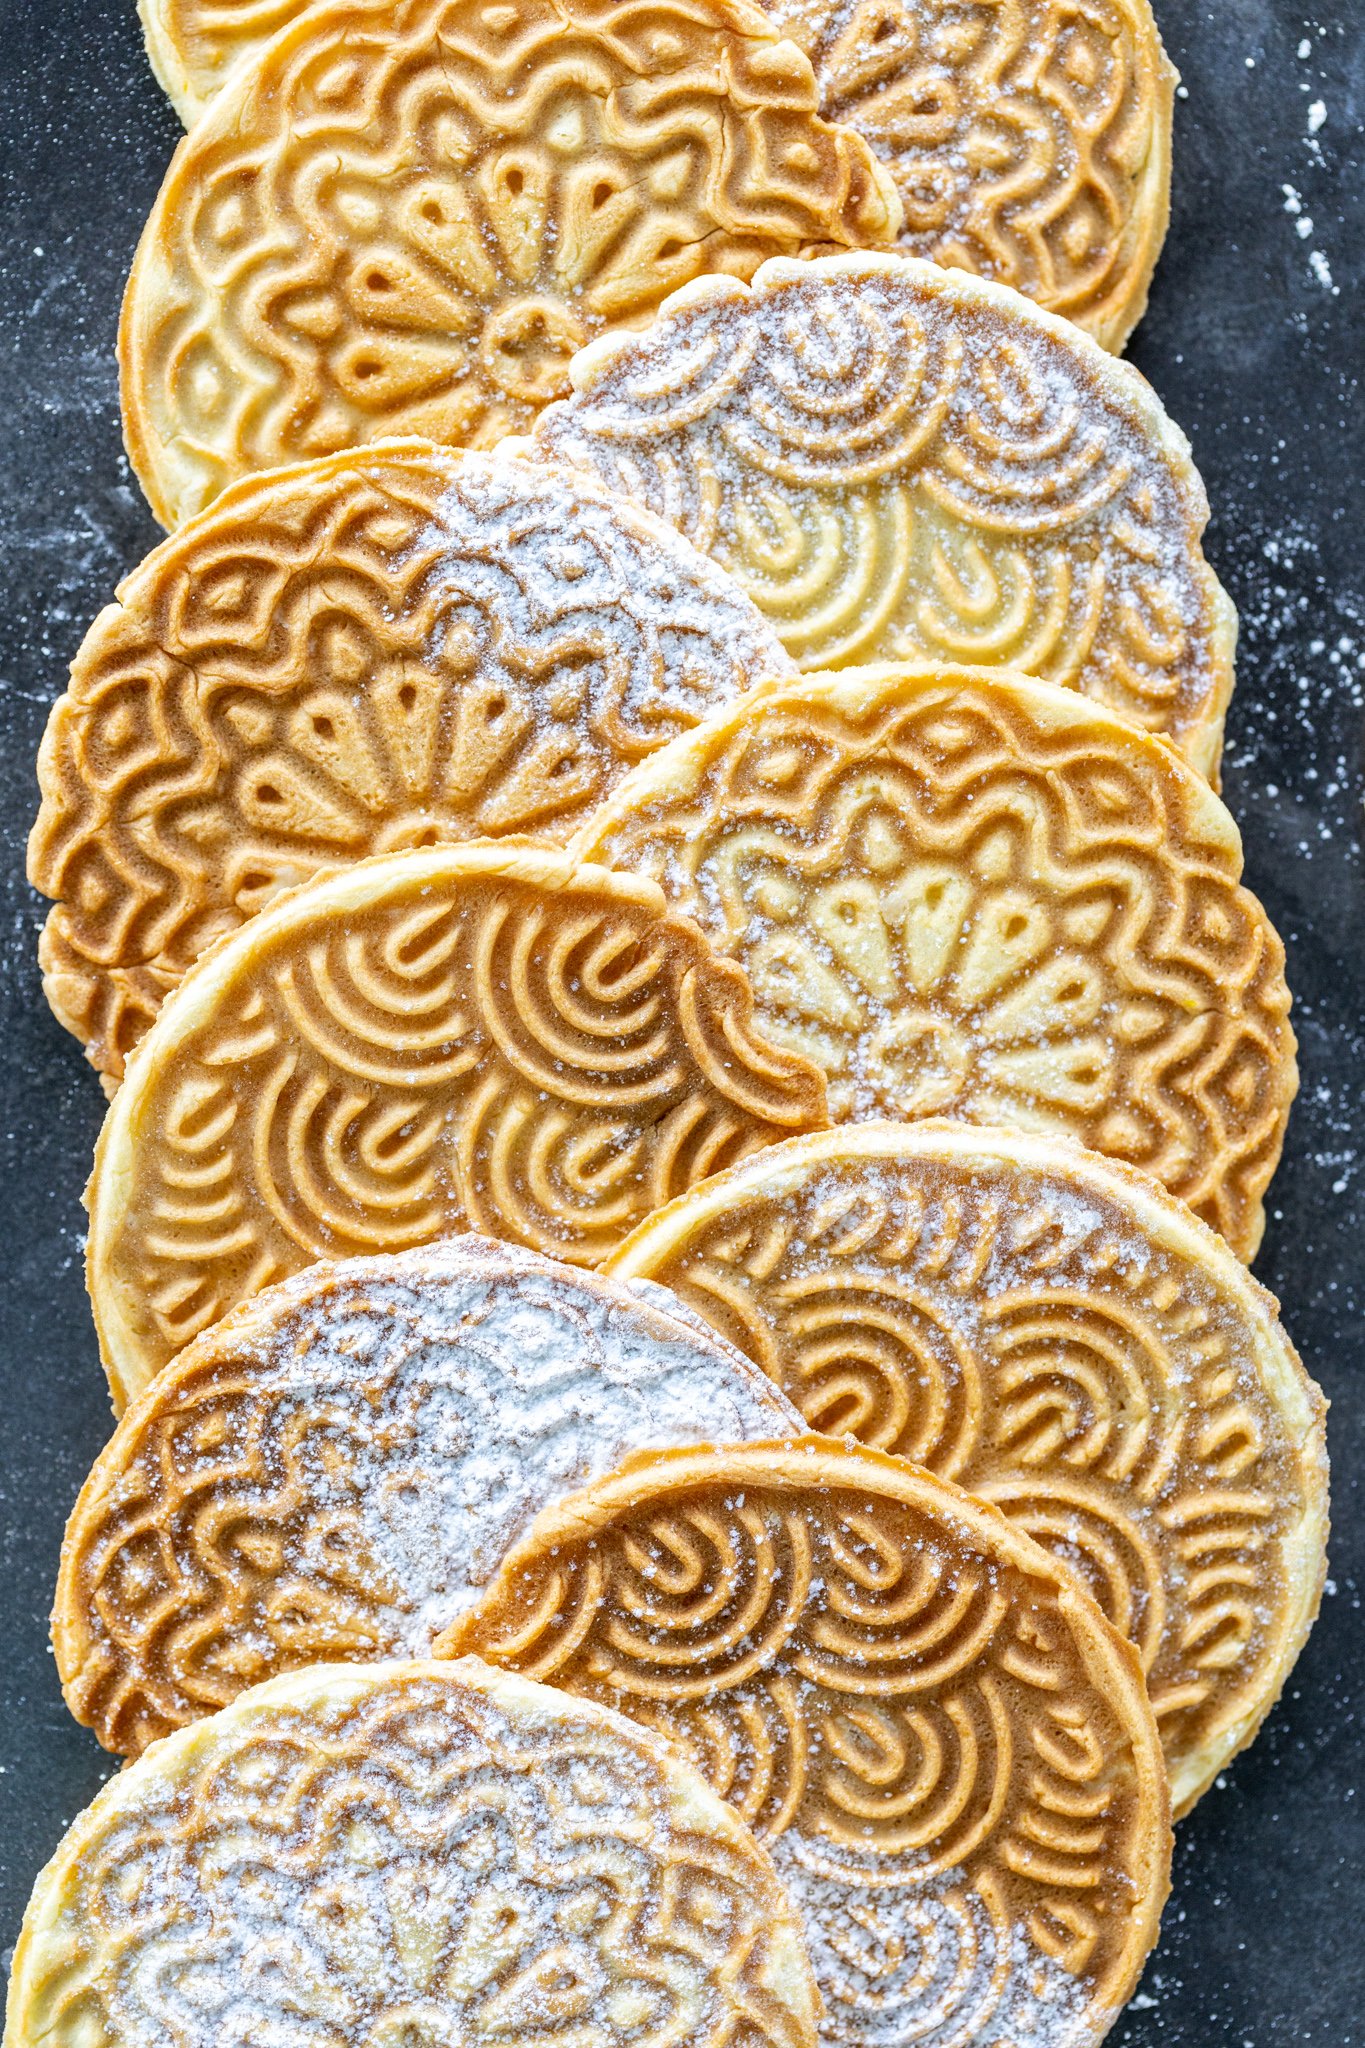 Pizzelle (Italian Anise-Flavored Wafer Cookies)